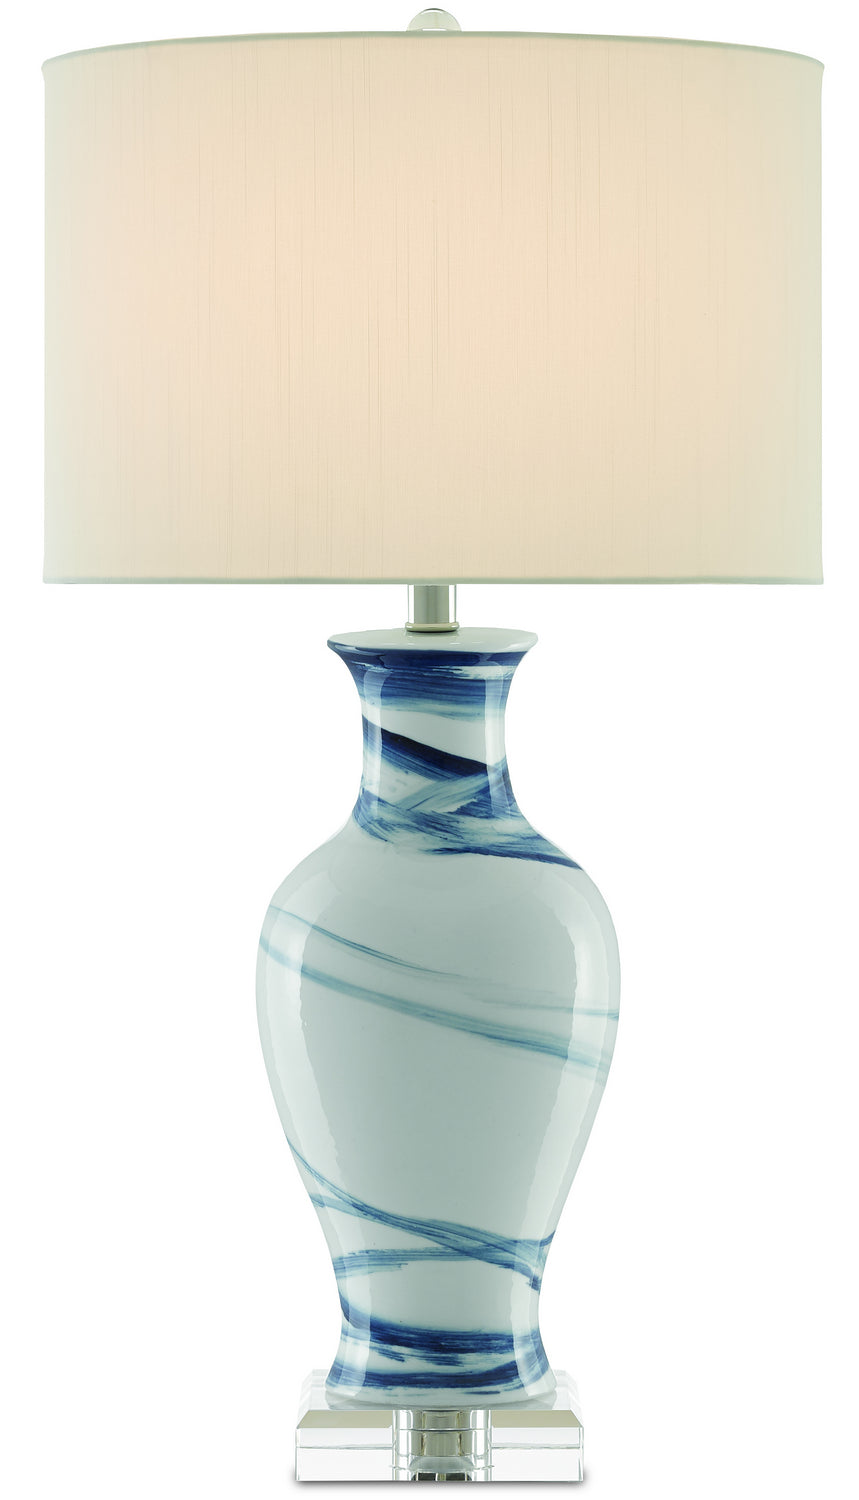 One Light Table Lamp from the Hanni collection in White/Blue finish